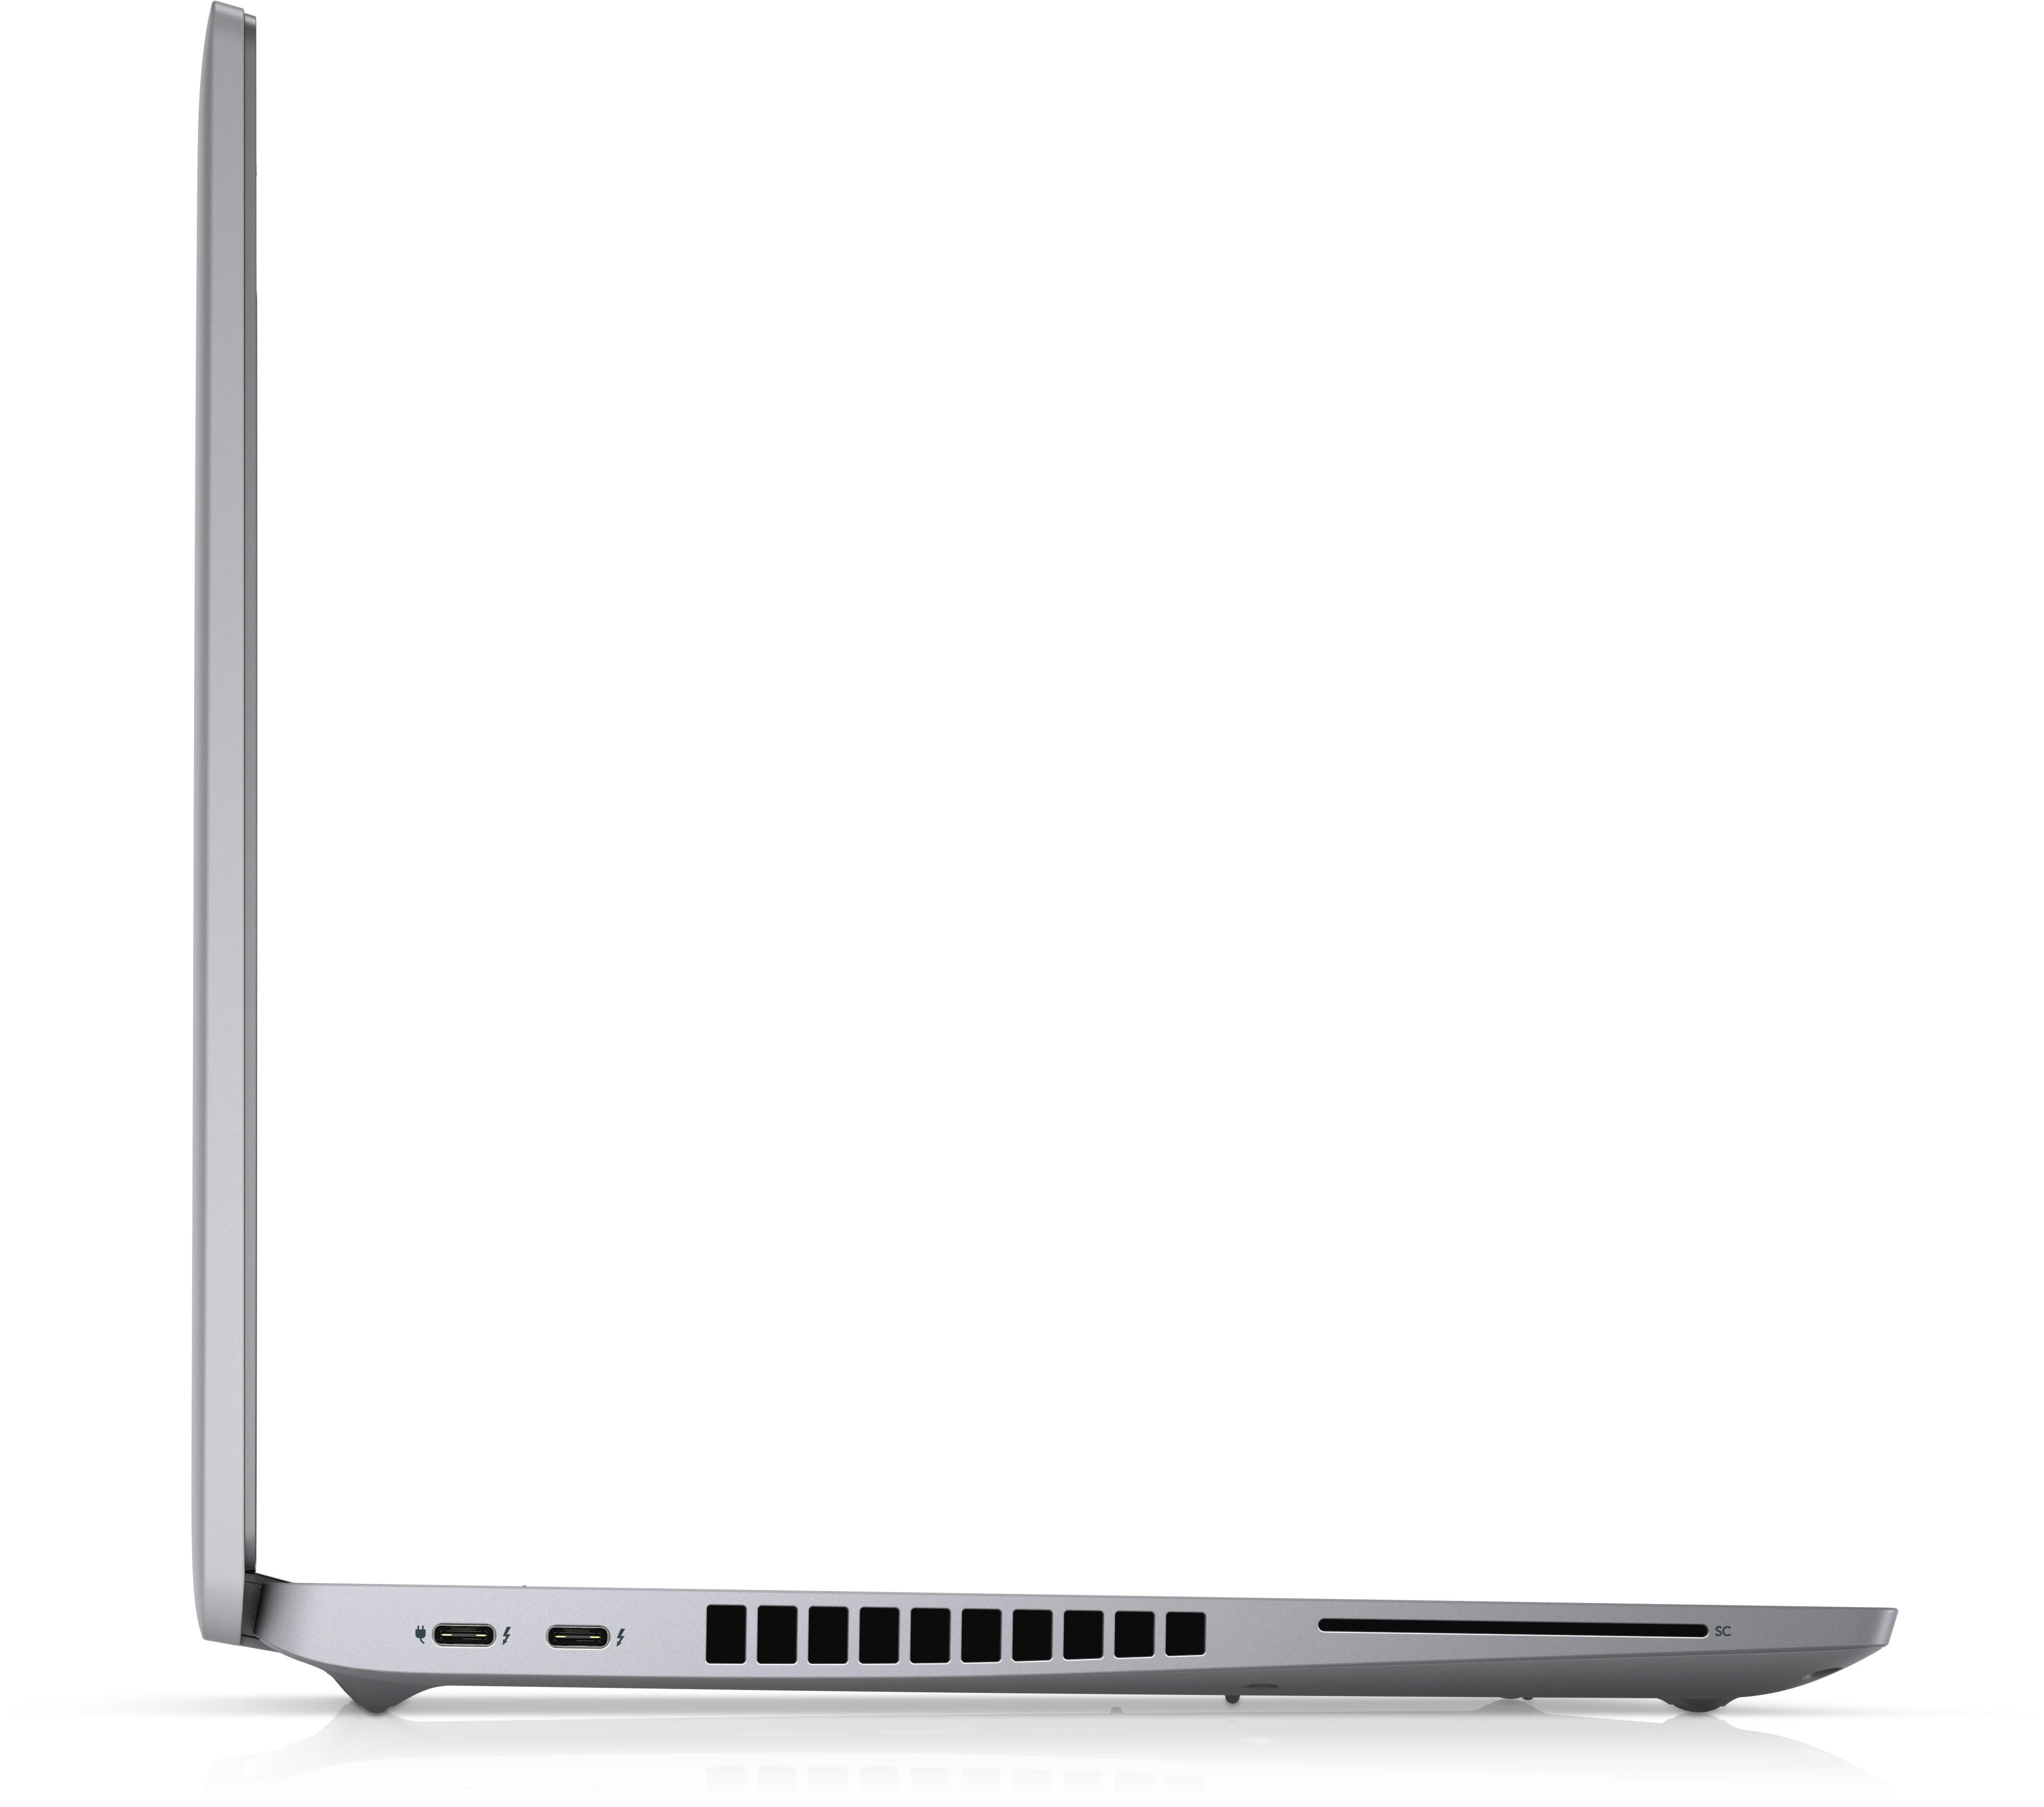 Latitude 15-Inch 5520 Business Laptop with Long Battery Life | Dell UK